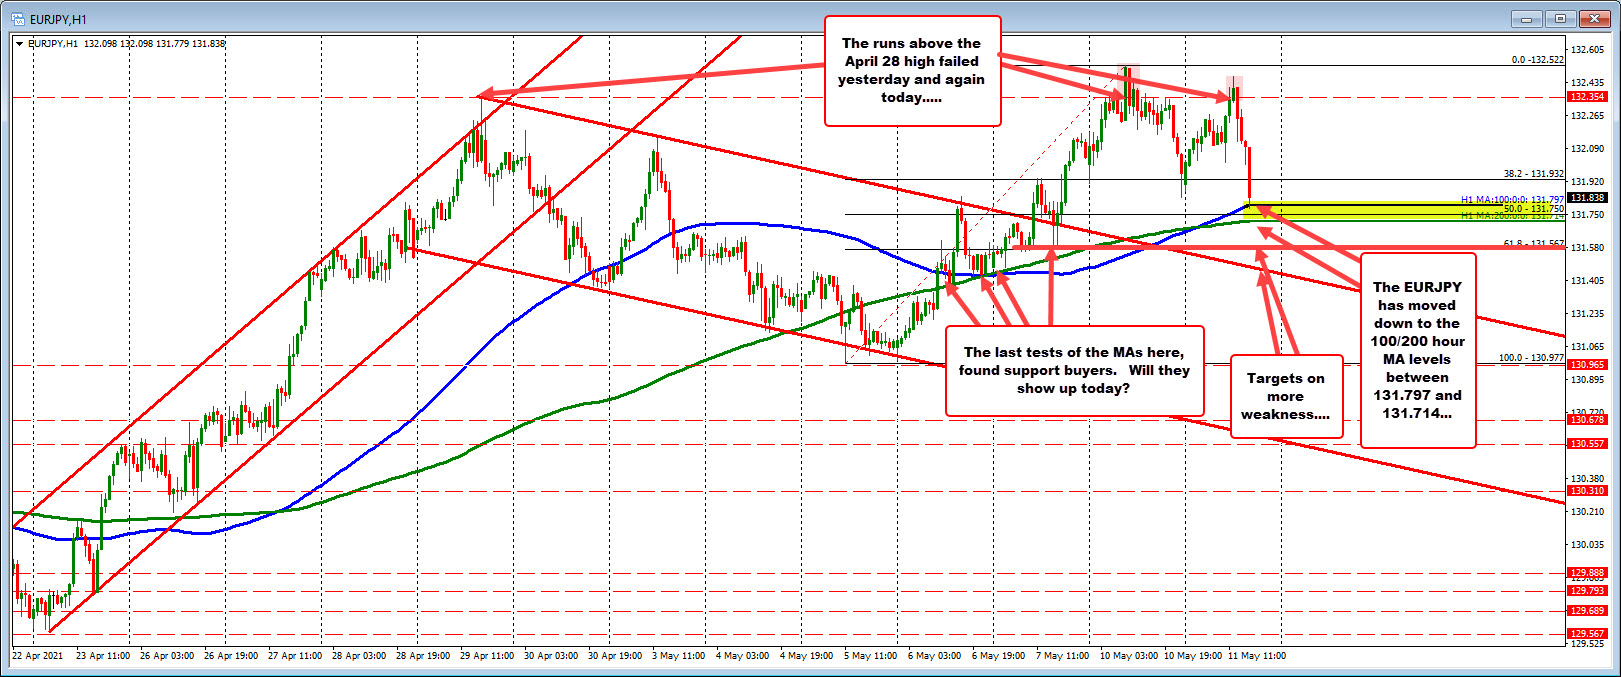 The lows from Thursday and Friday of last week in the EURJPY stalled ahead of the MAs